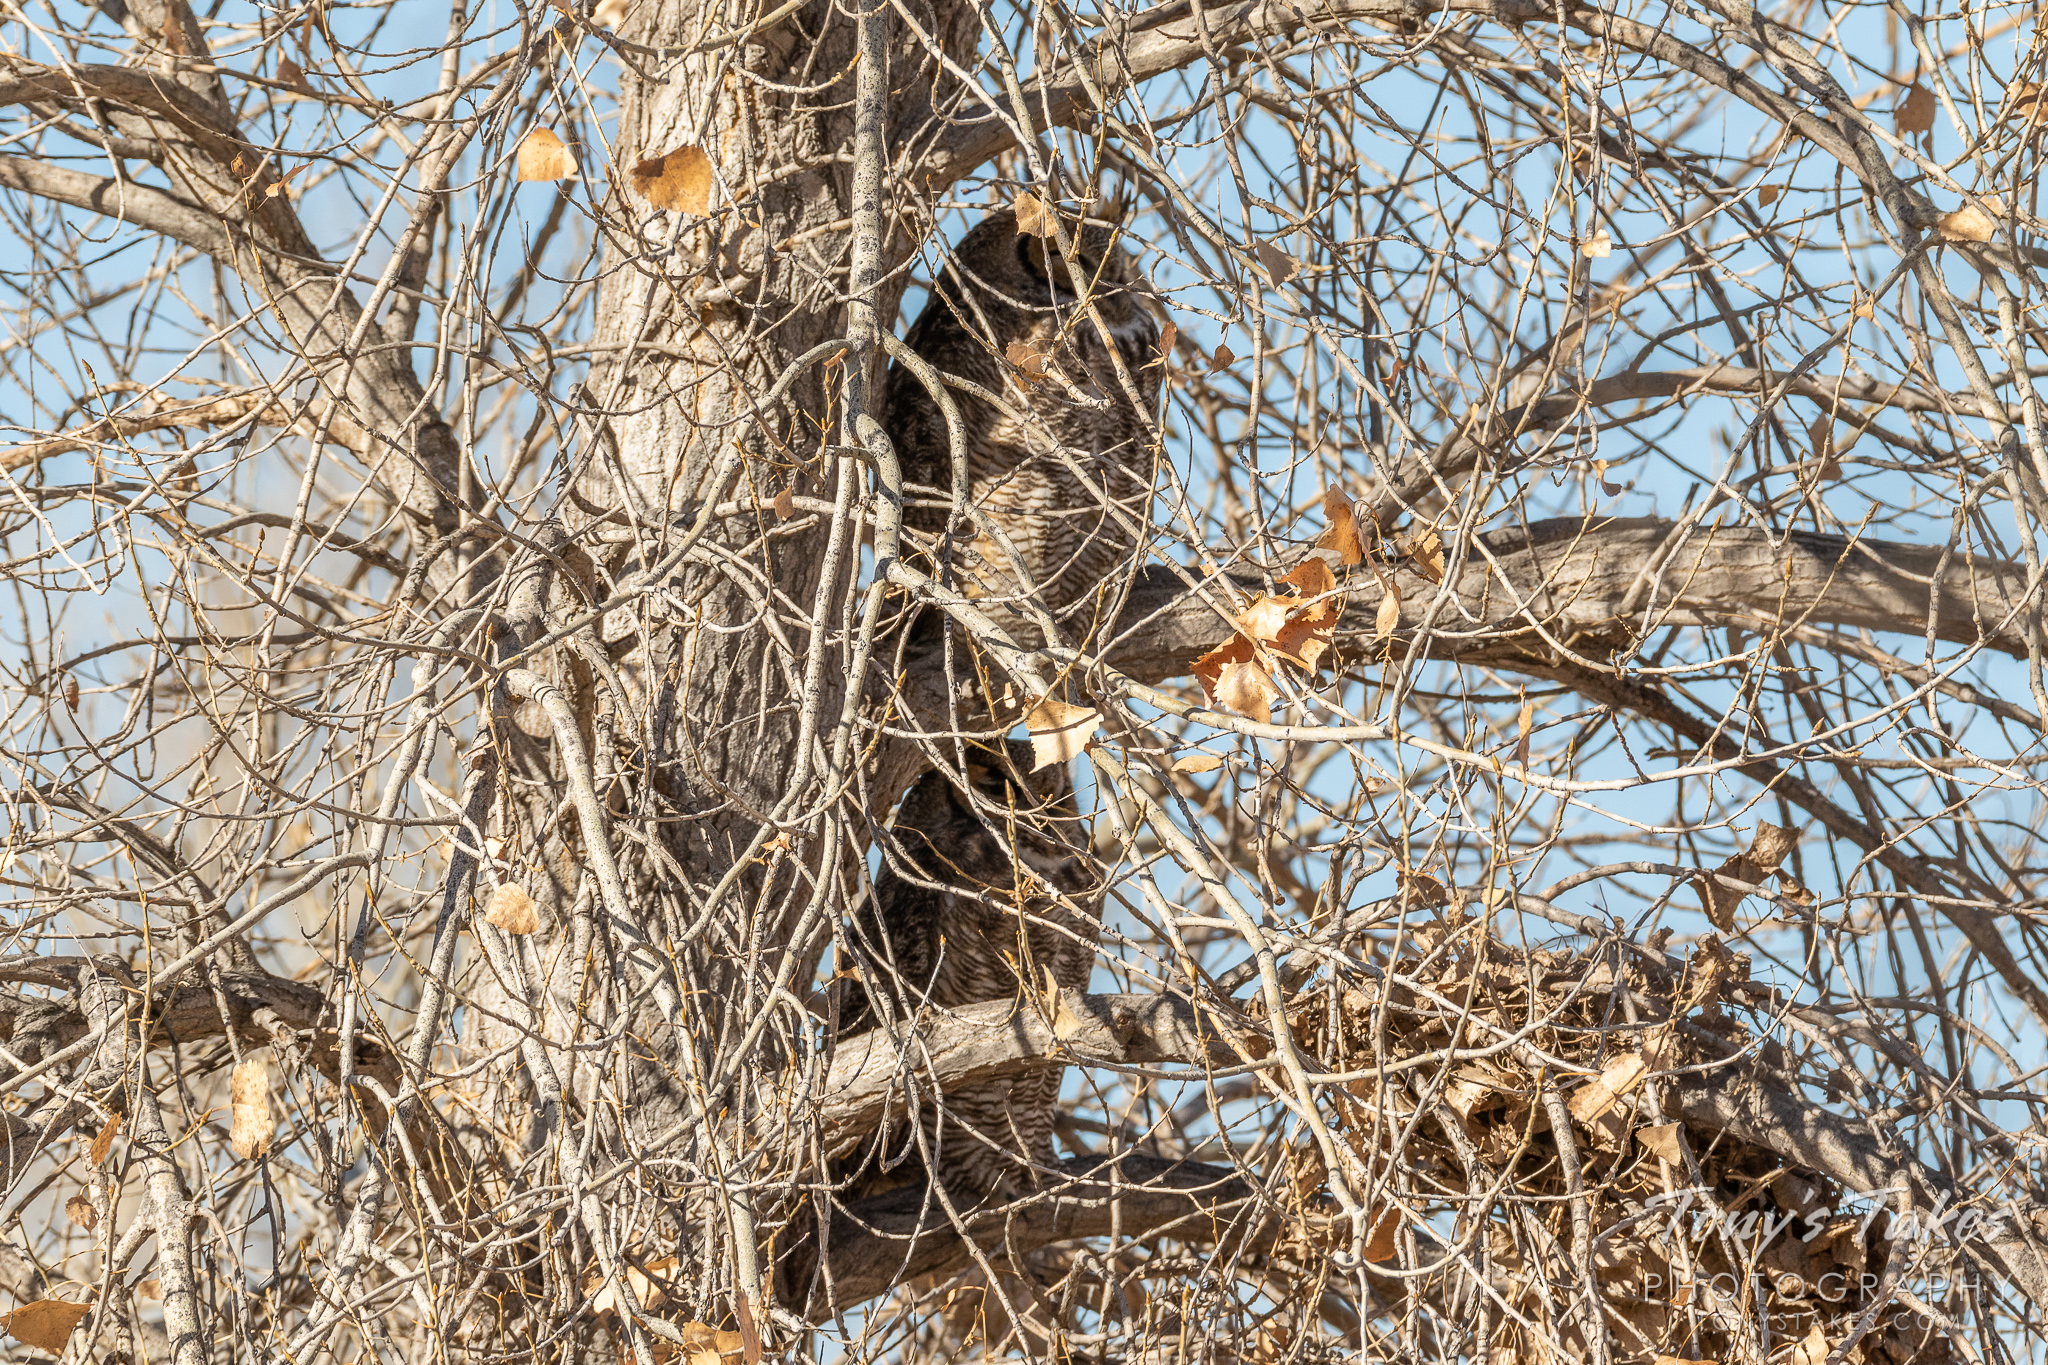 A pair of great horned owls keeps themselves concealed close to a tree's trunk in Thornton, Colorado. (© Tony’s Takes)